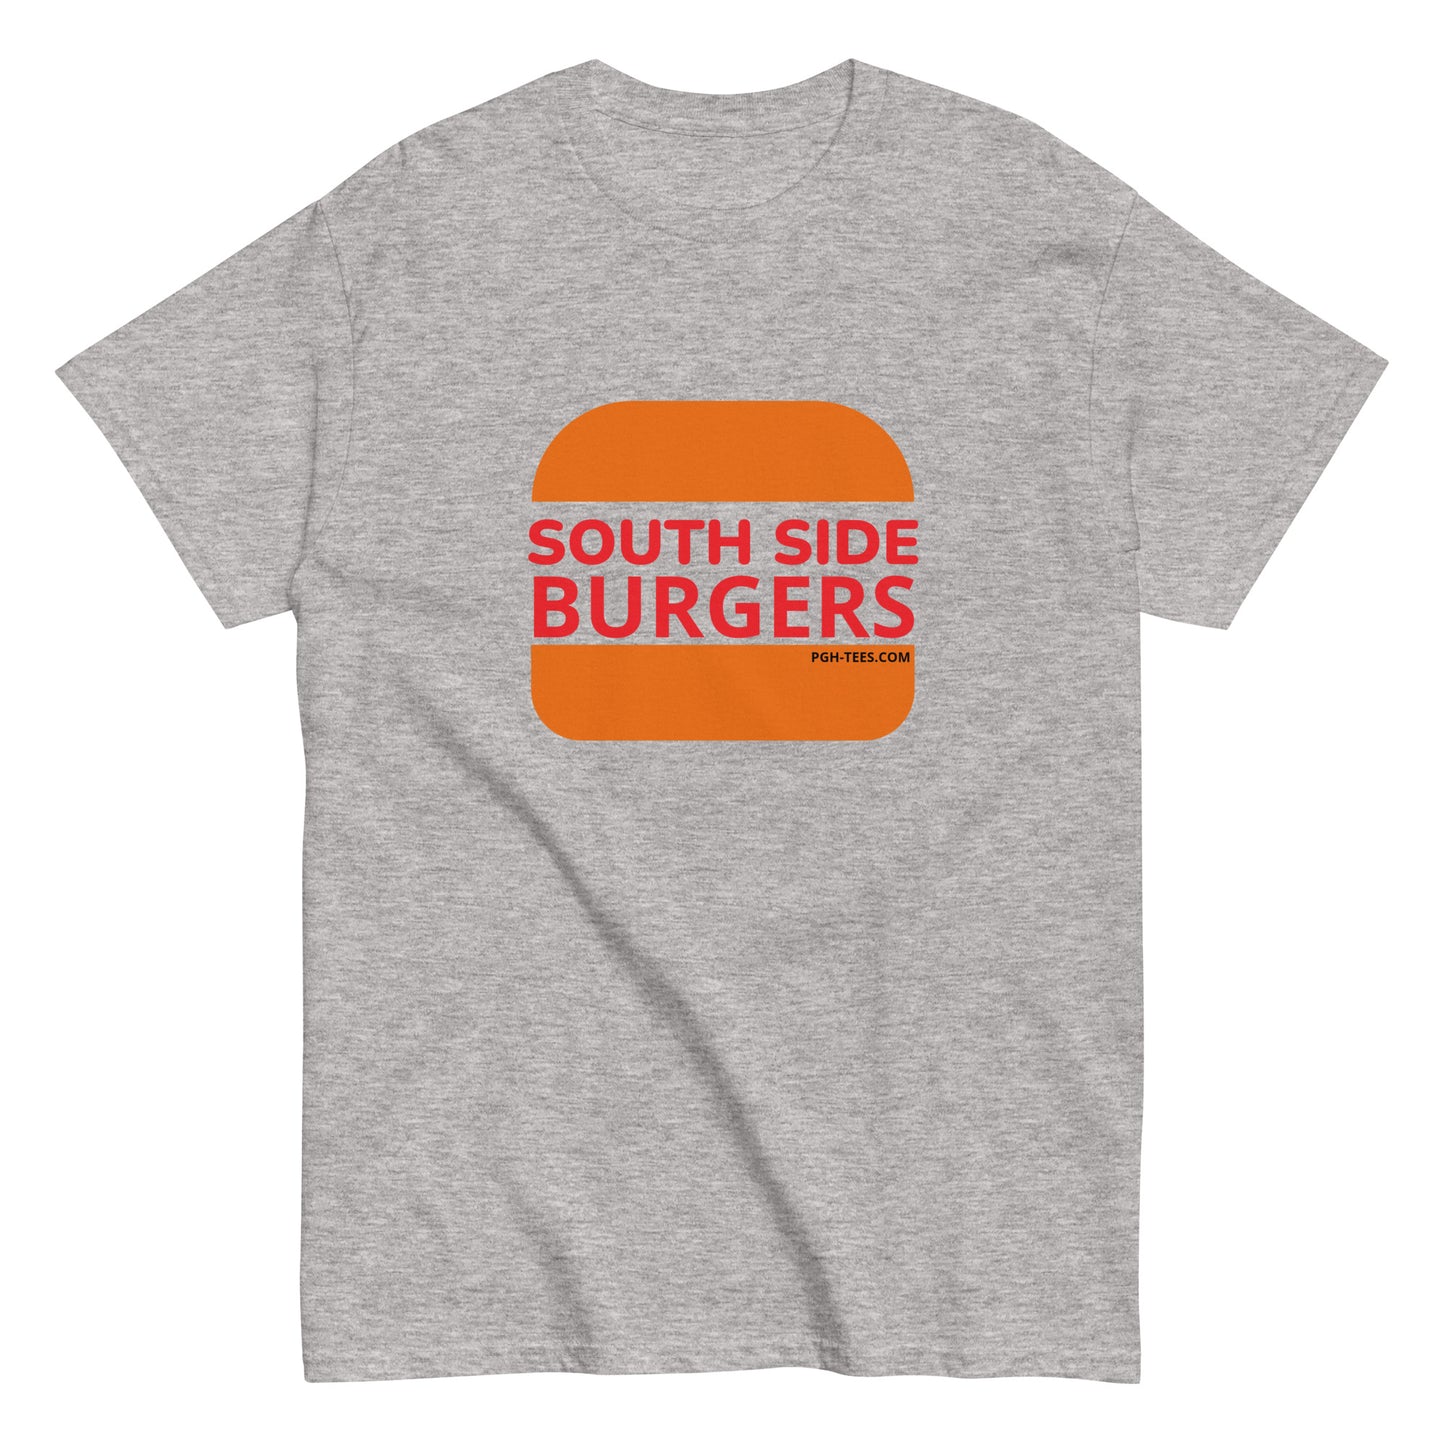 SOUTH SIDE BURGERS